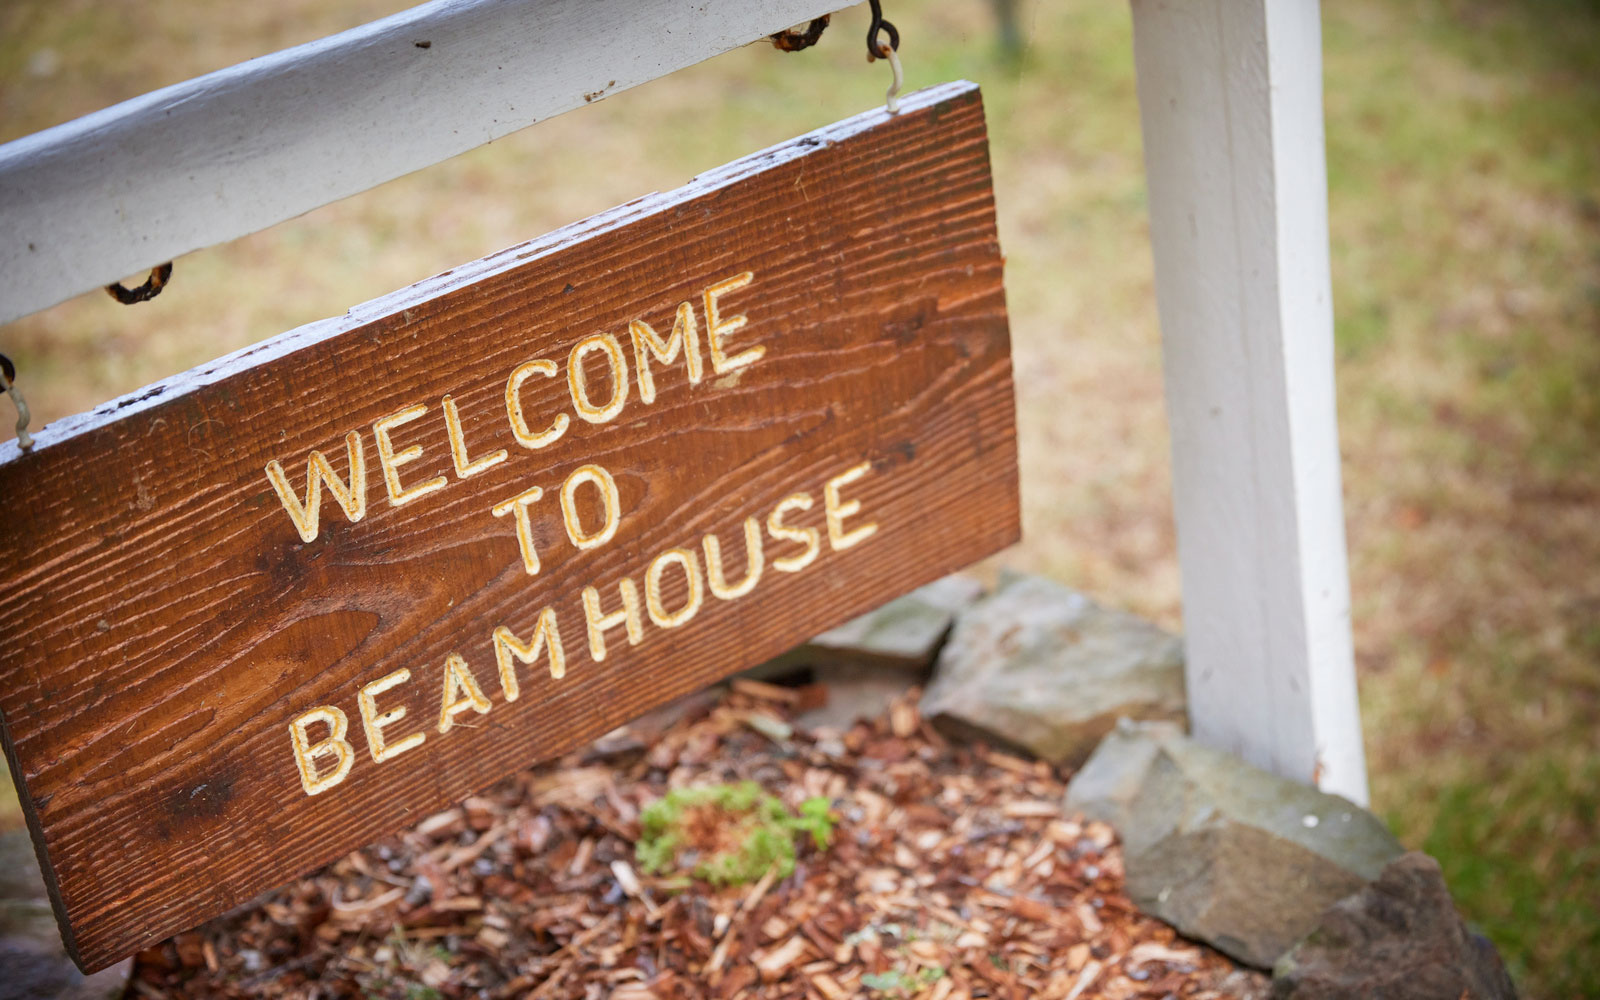 A sign which reads 'WELCOME TO BEAM HOUSE'